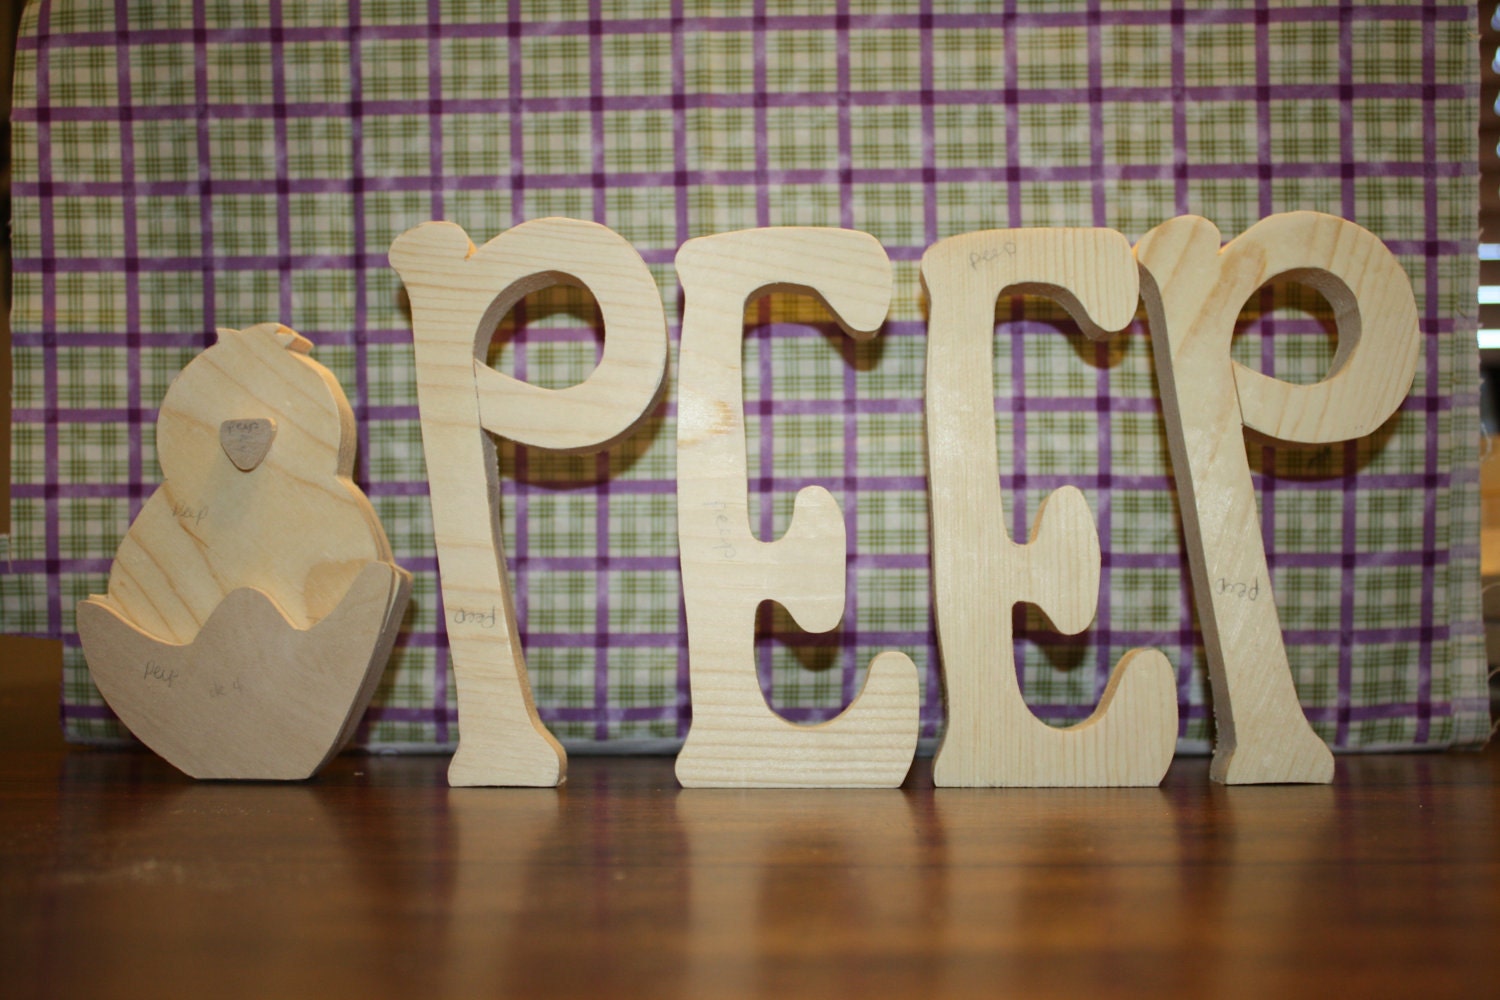 UNFINISHED  PEEP wood letters with cute chick.